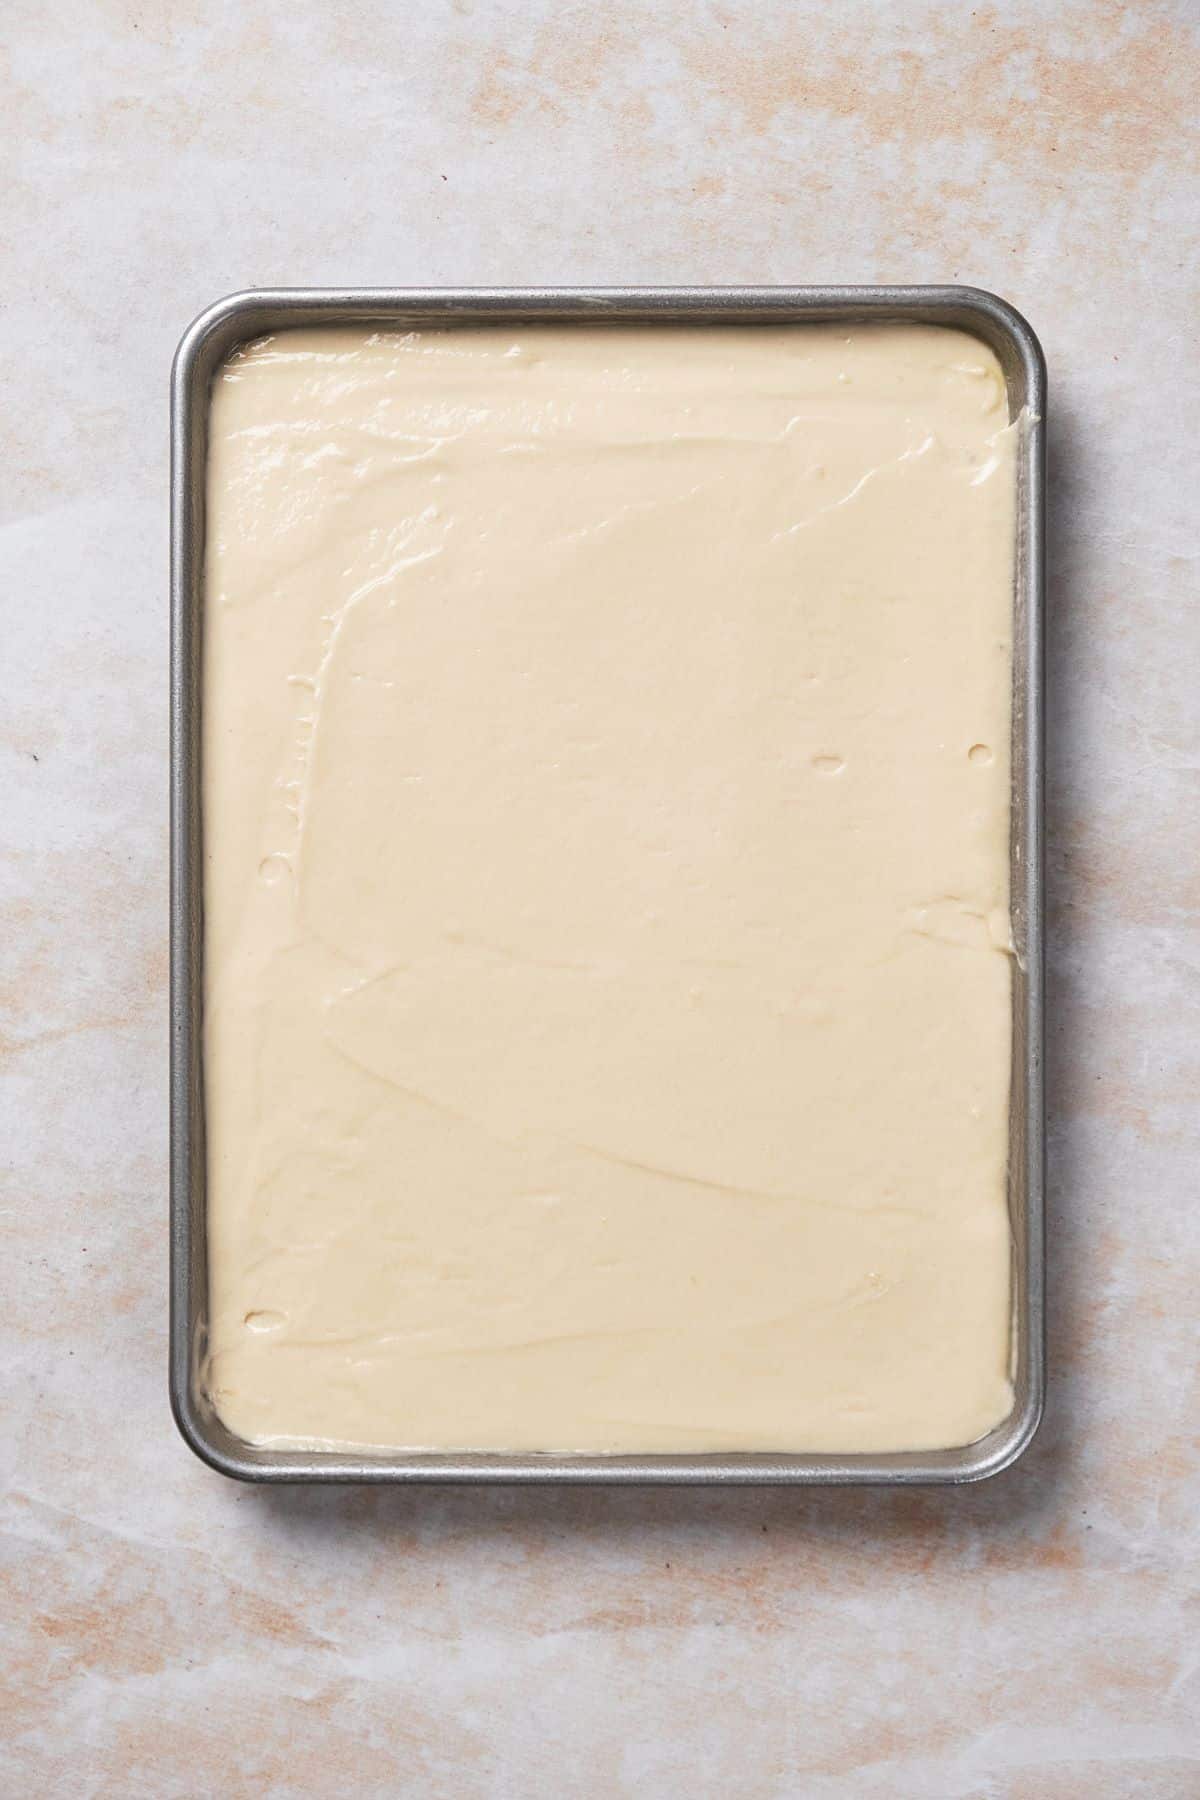 Sour cream coconut cake batter in a cake pan.